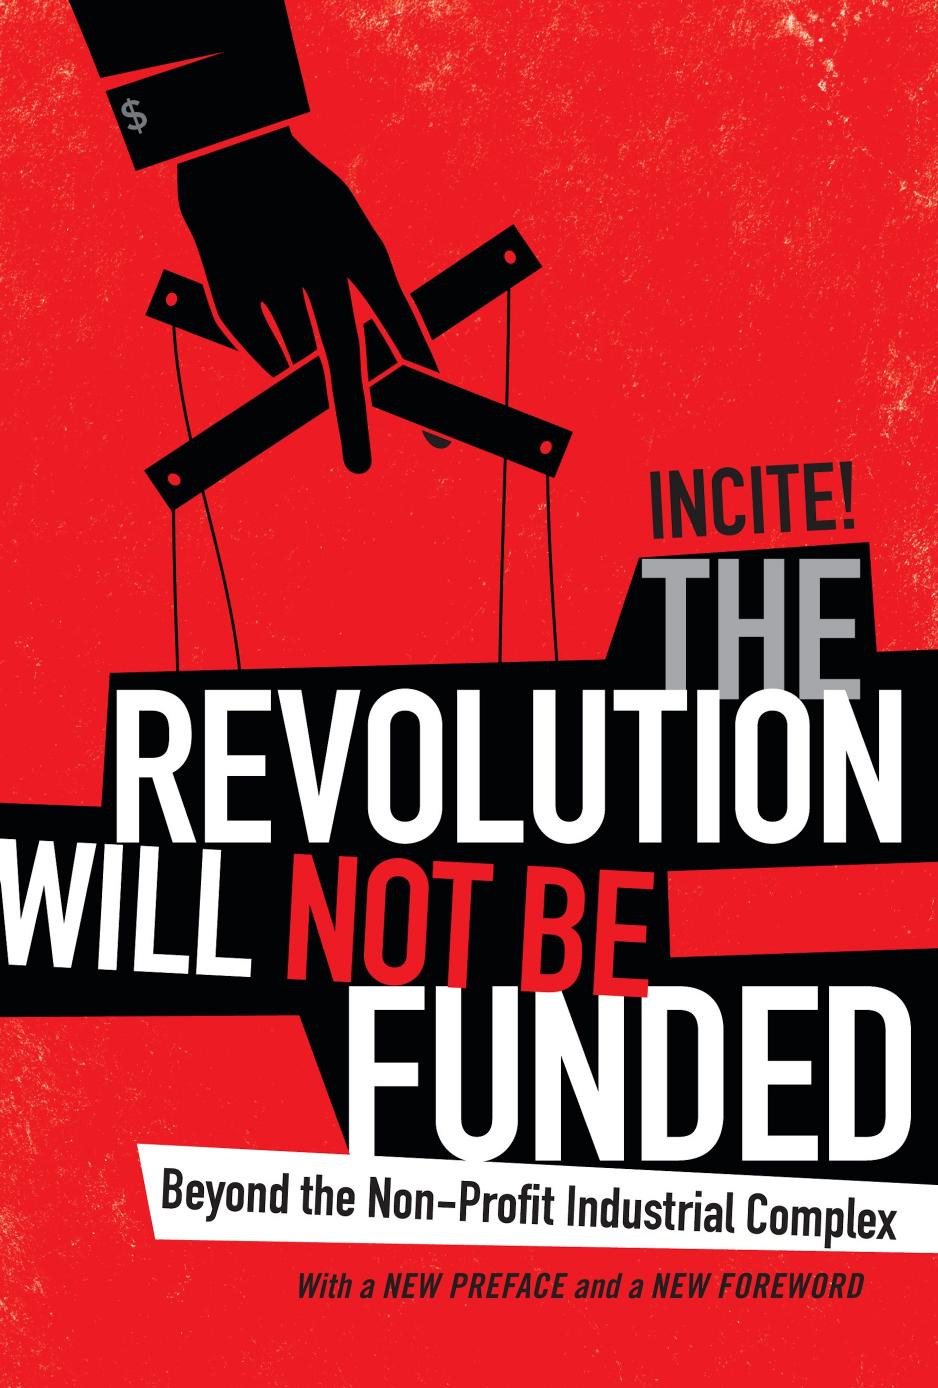 The Revolution Will Not Be Funded: Beyond the Non-Profit Industrial Complex by INCITE!